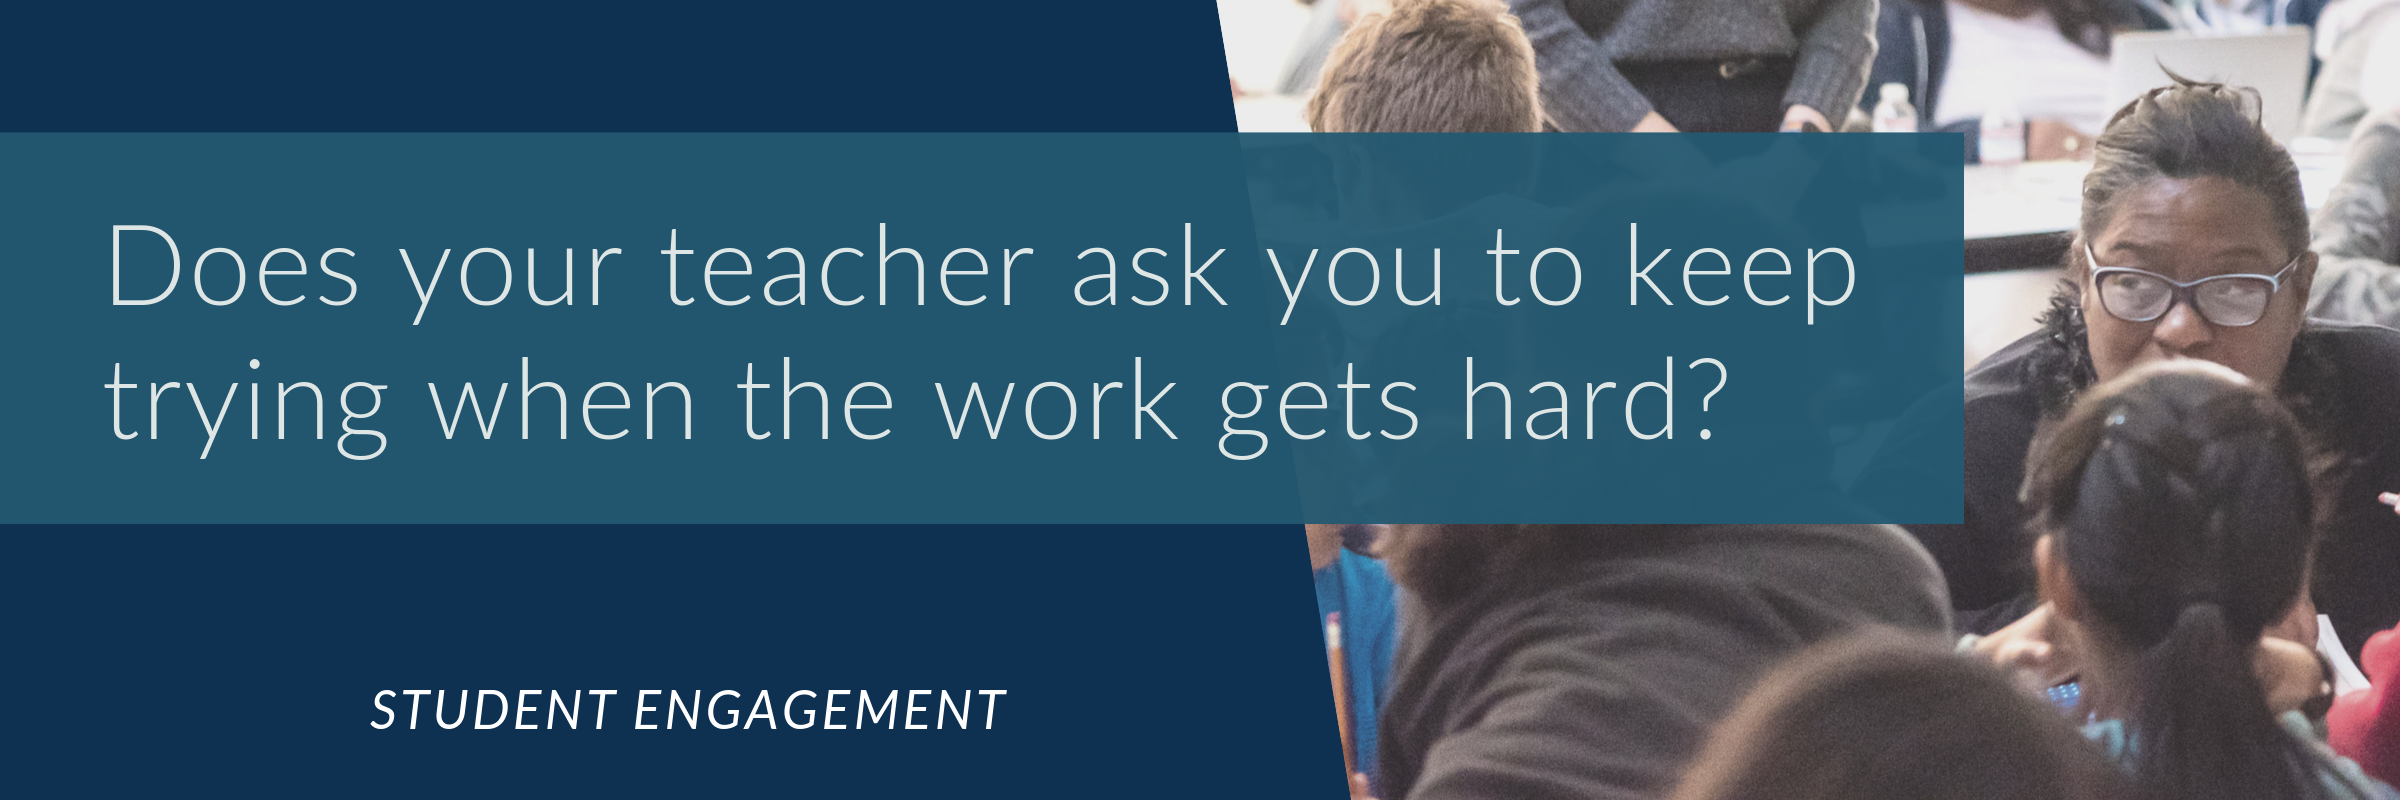 Does your teacher ask you to keep trying when the work gets hard?